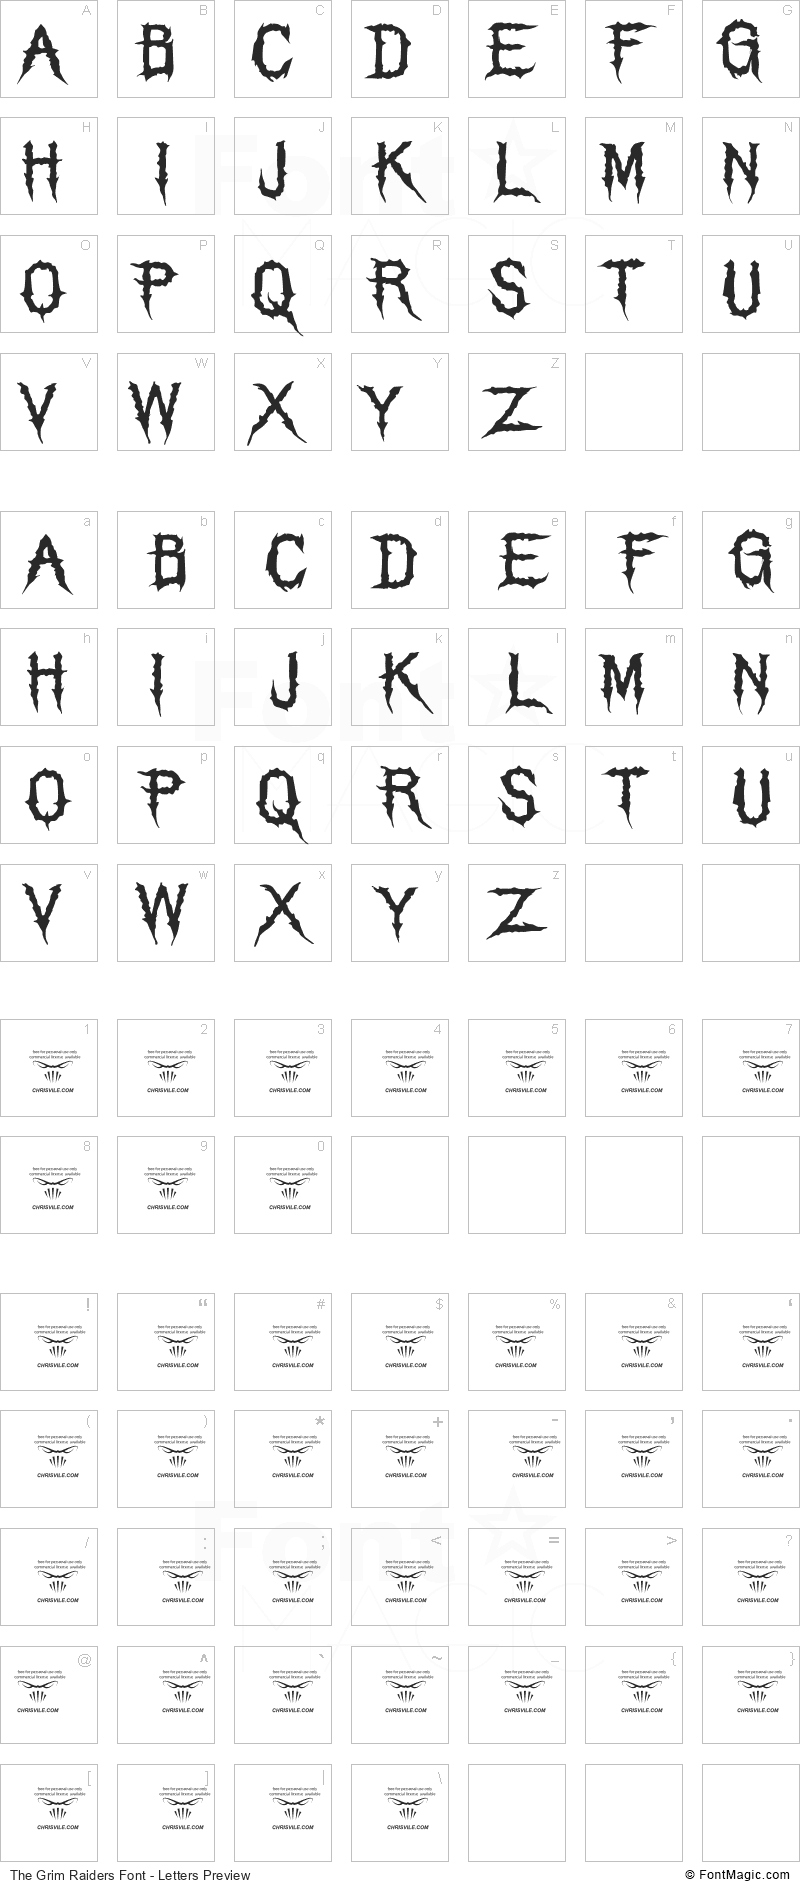 The Grim Raiders Font - All Latters Preview Chart